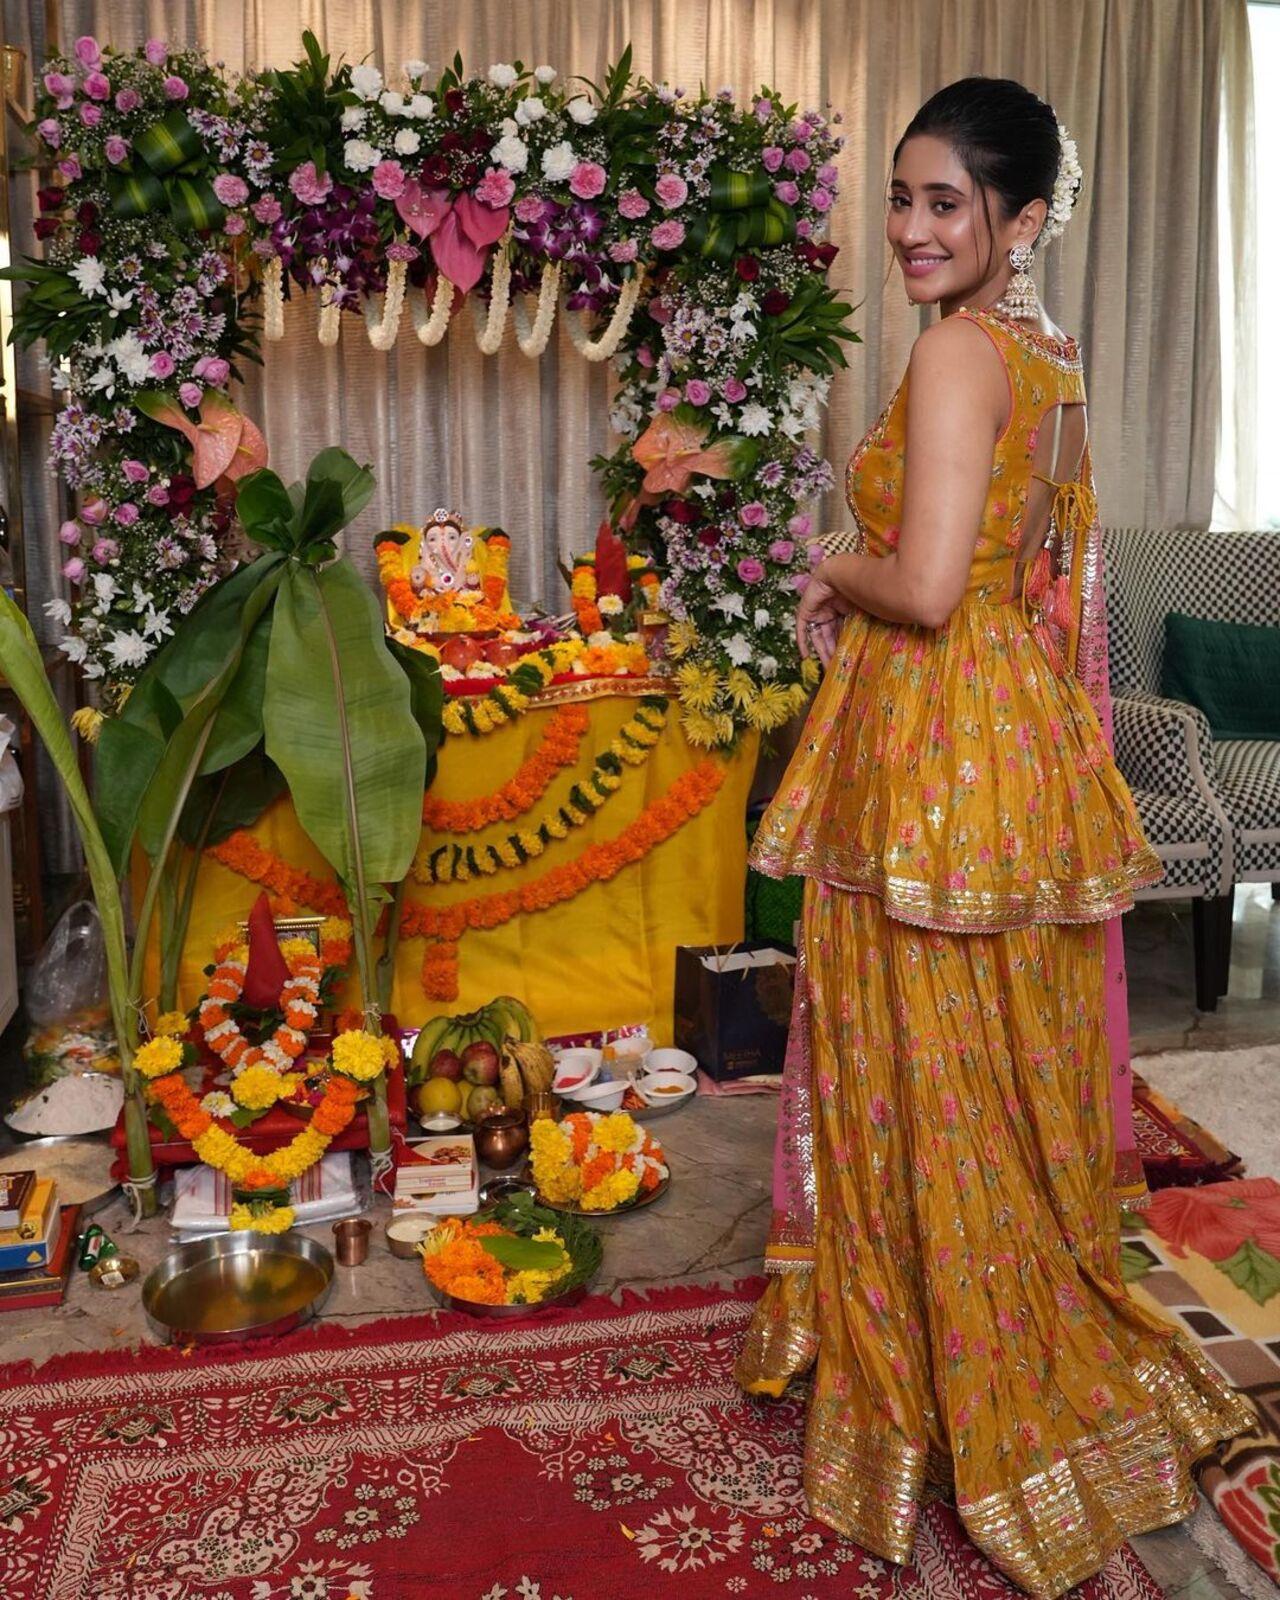 Shivangi Joshi invited Ganpati home this year and hosted him with devotion and enthusiasm. The actress shared pictures from the celebration on Instagram